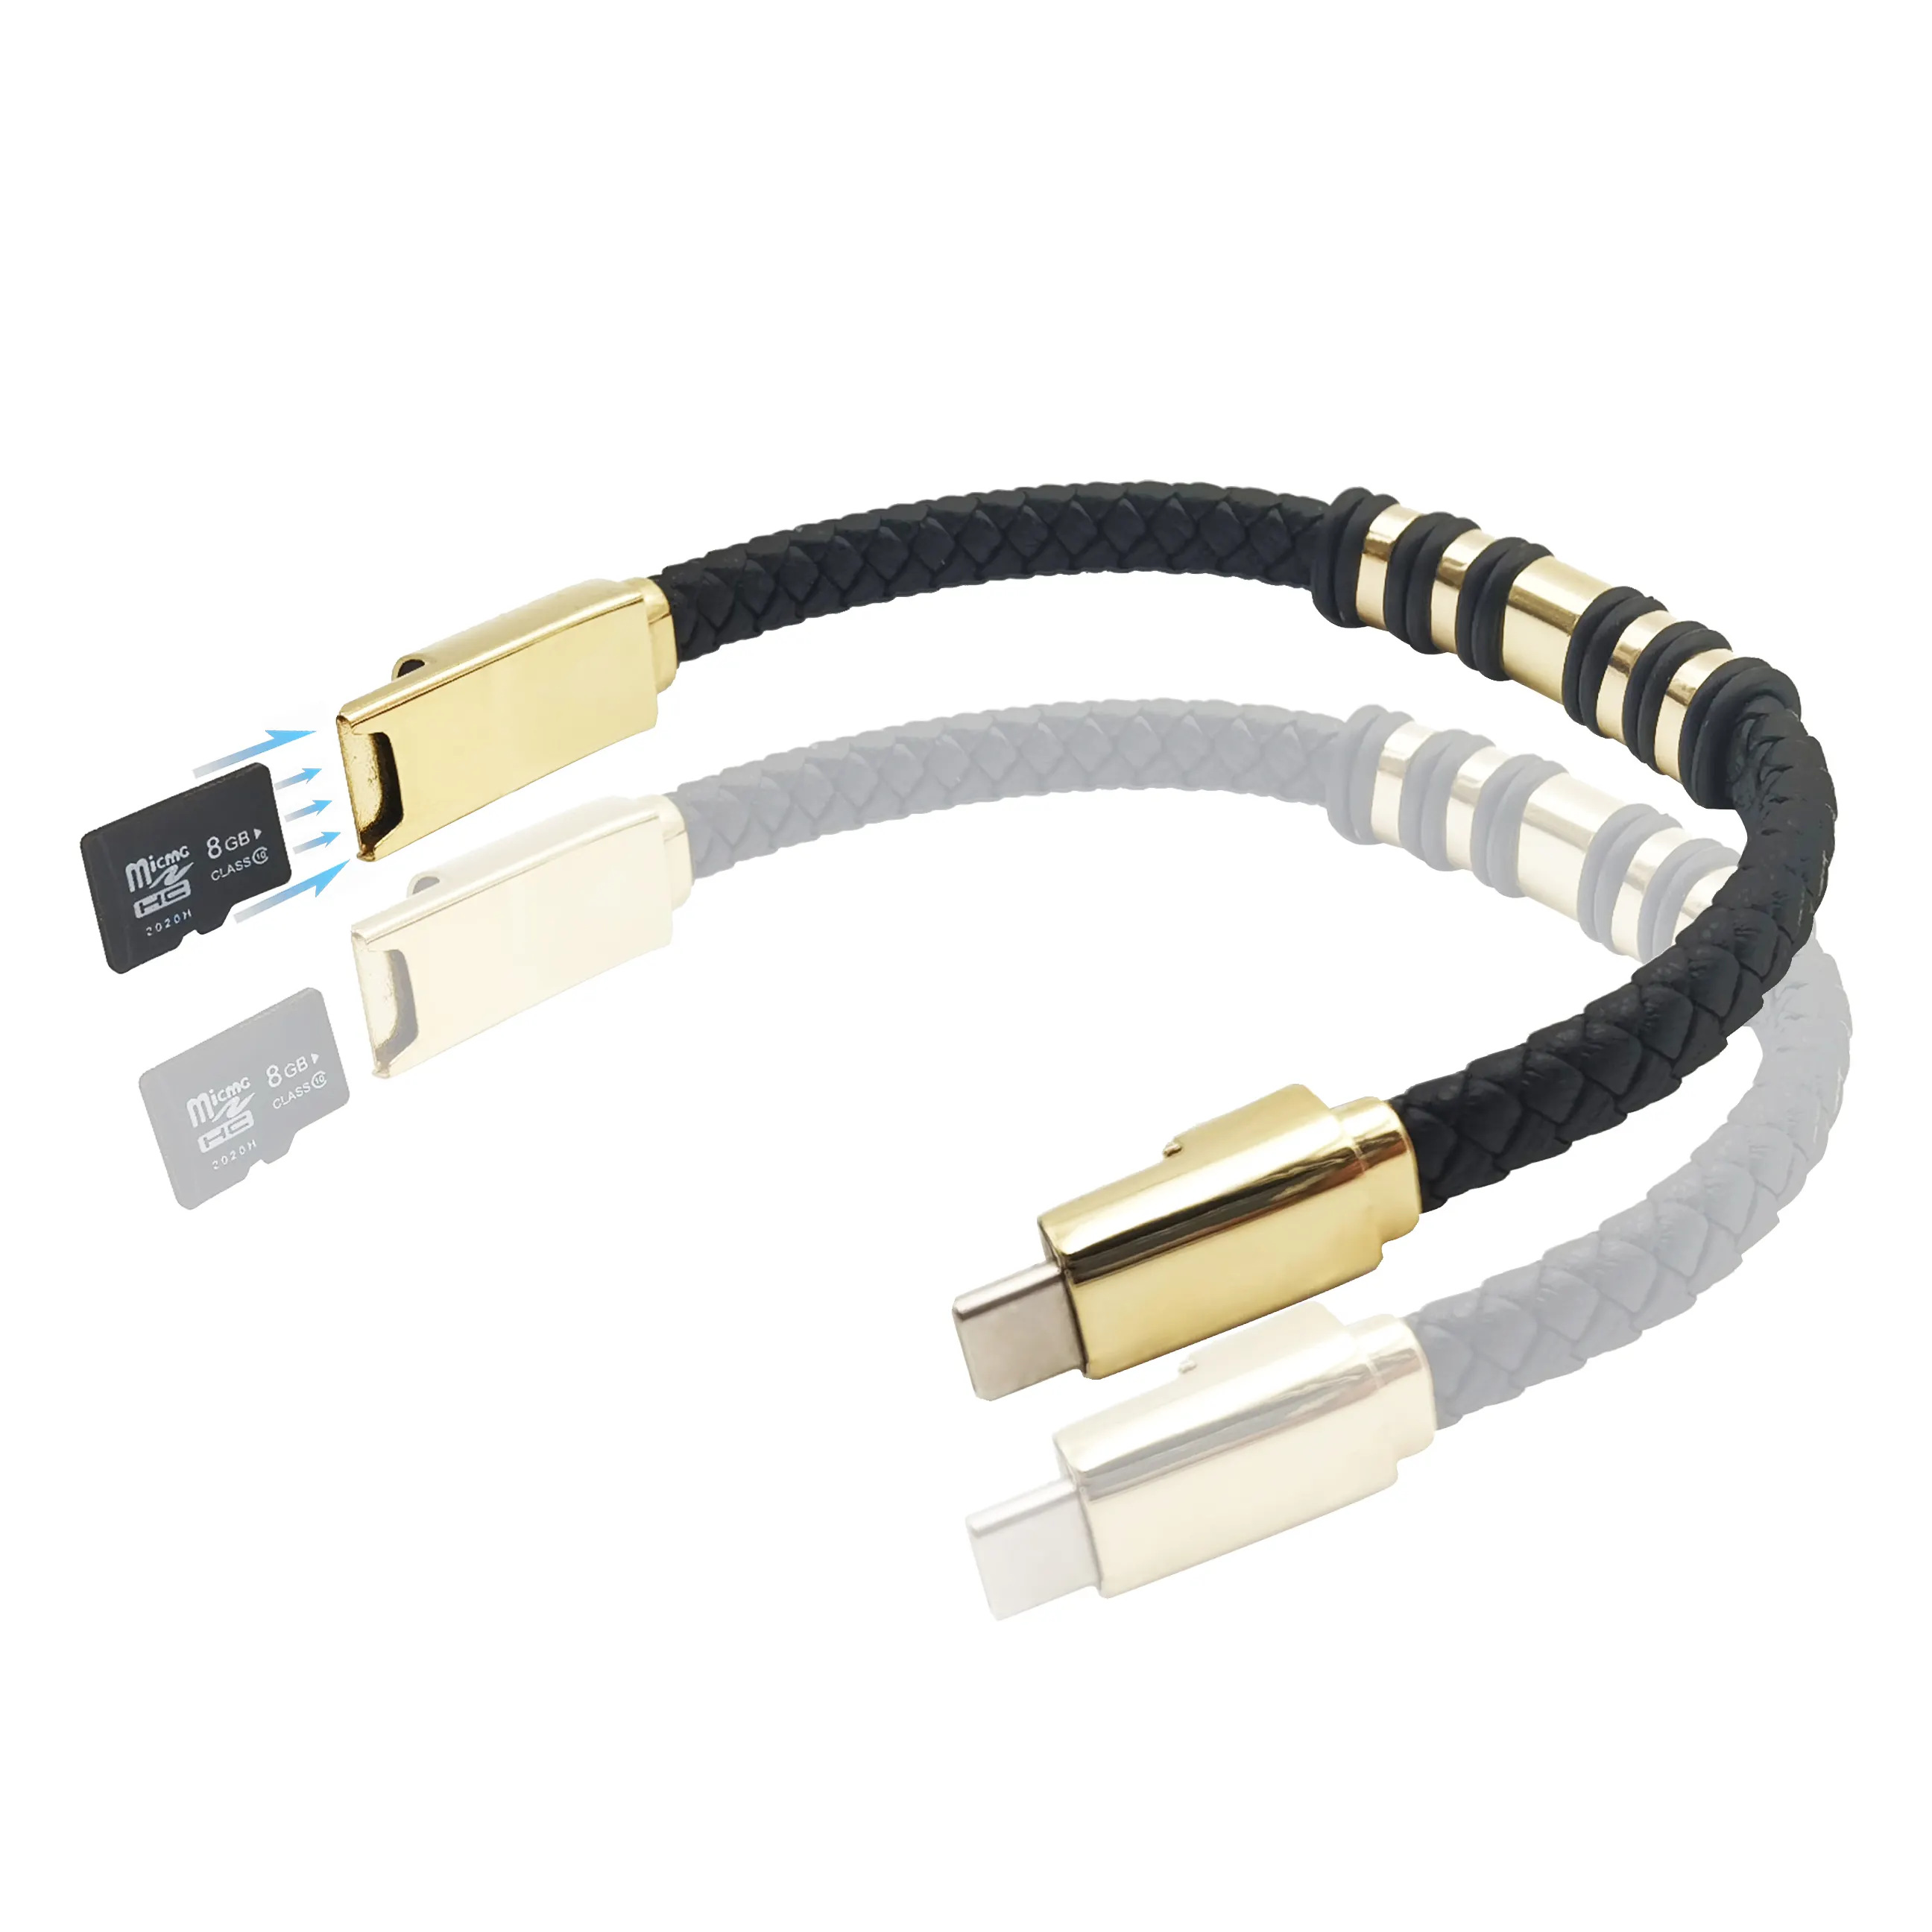 SD Card Can Be Inserted Leather Bracelet 20cm Short USB Charging Data Cable For Iphone Type C Micro Charger